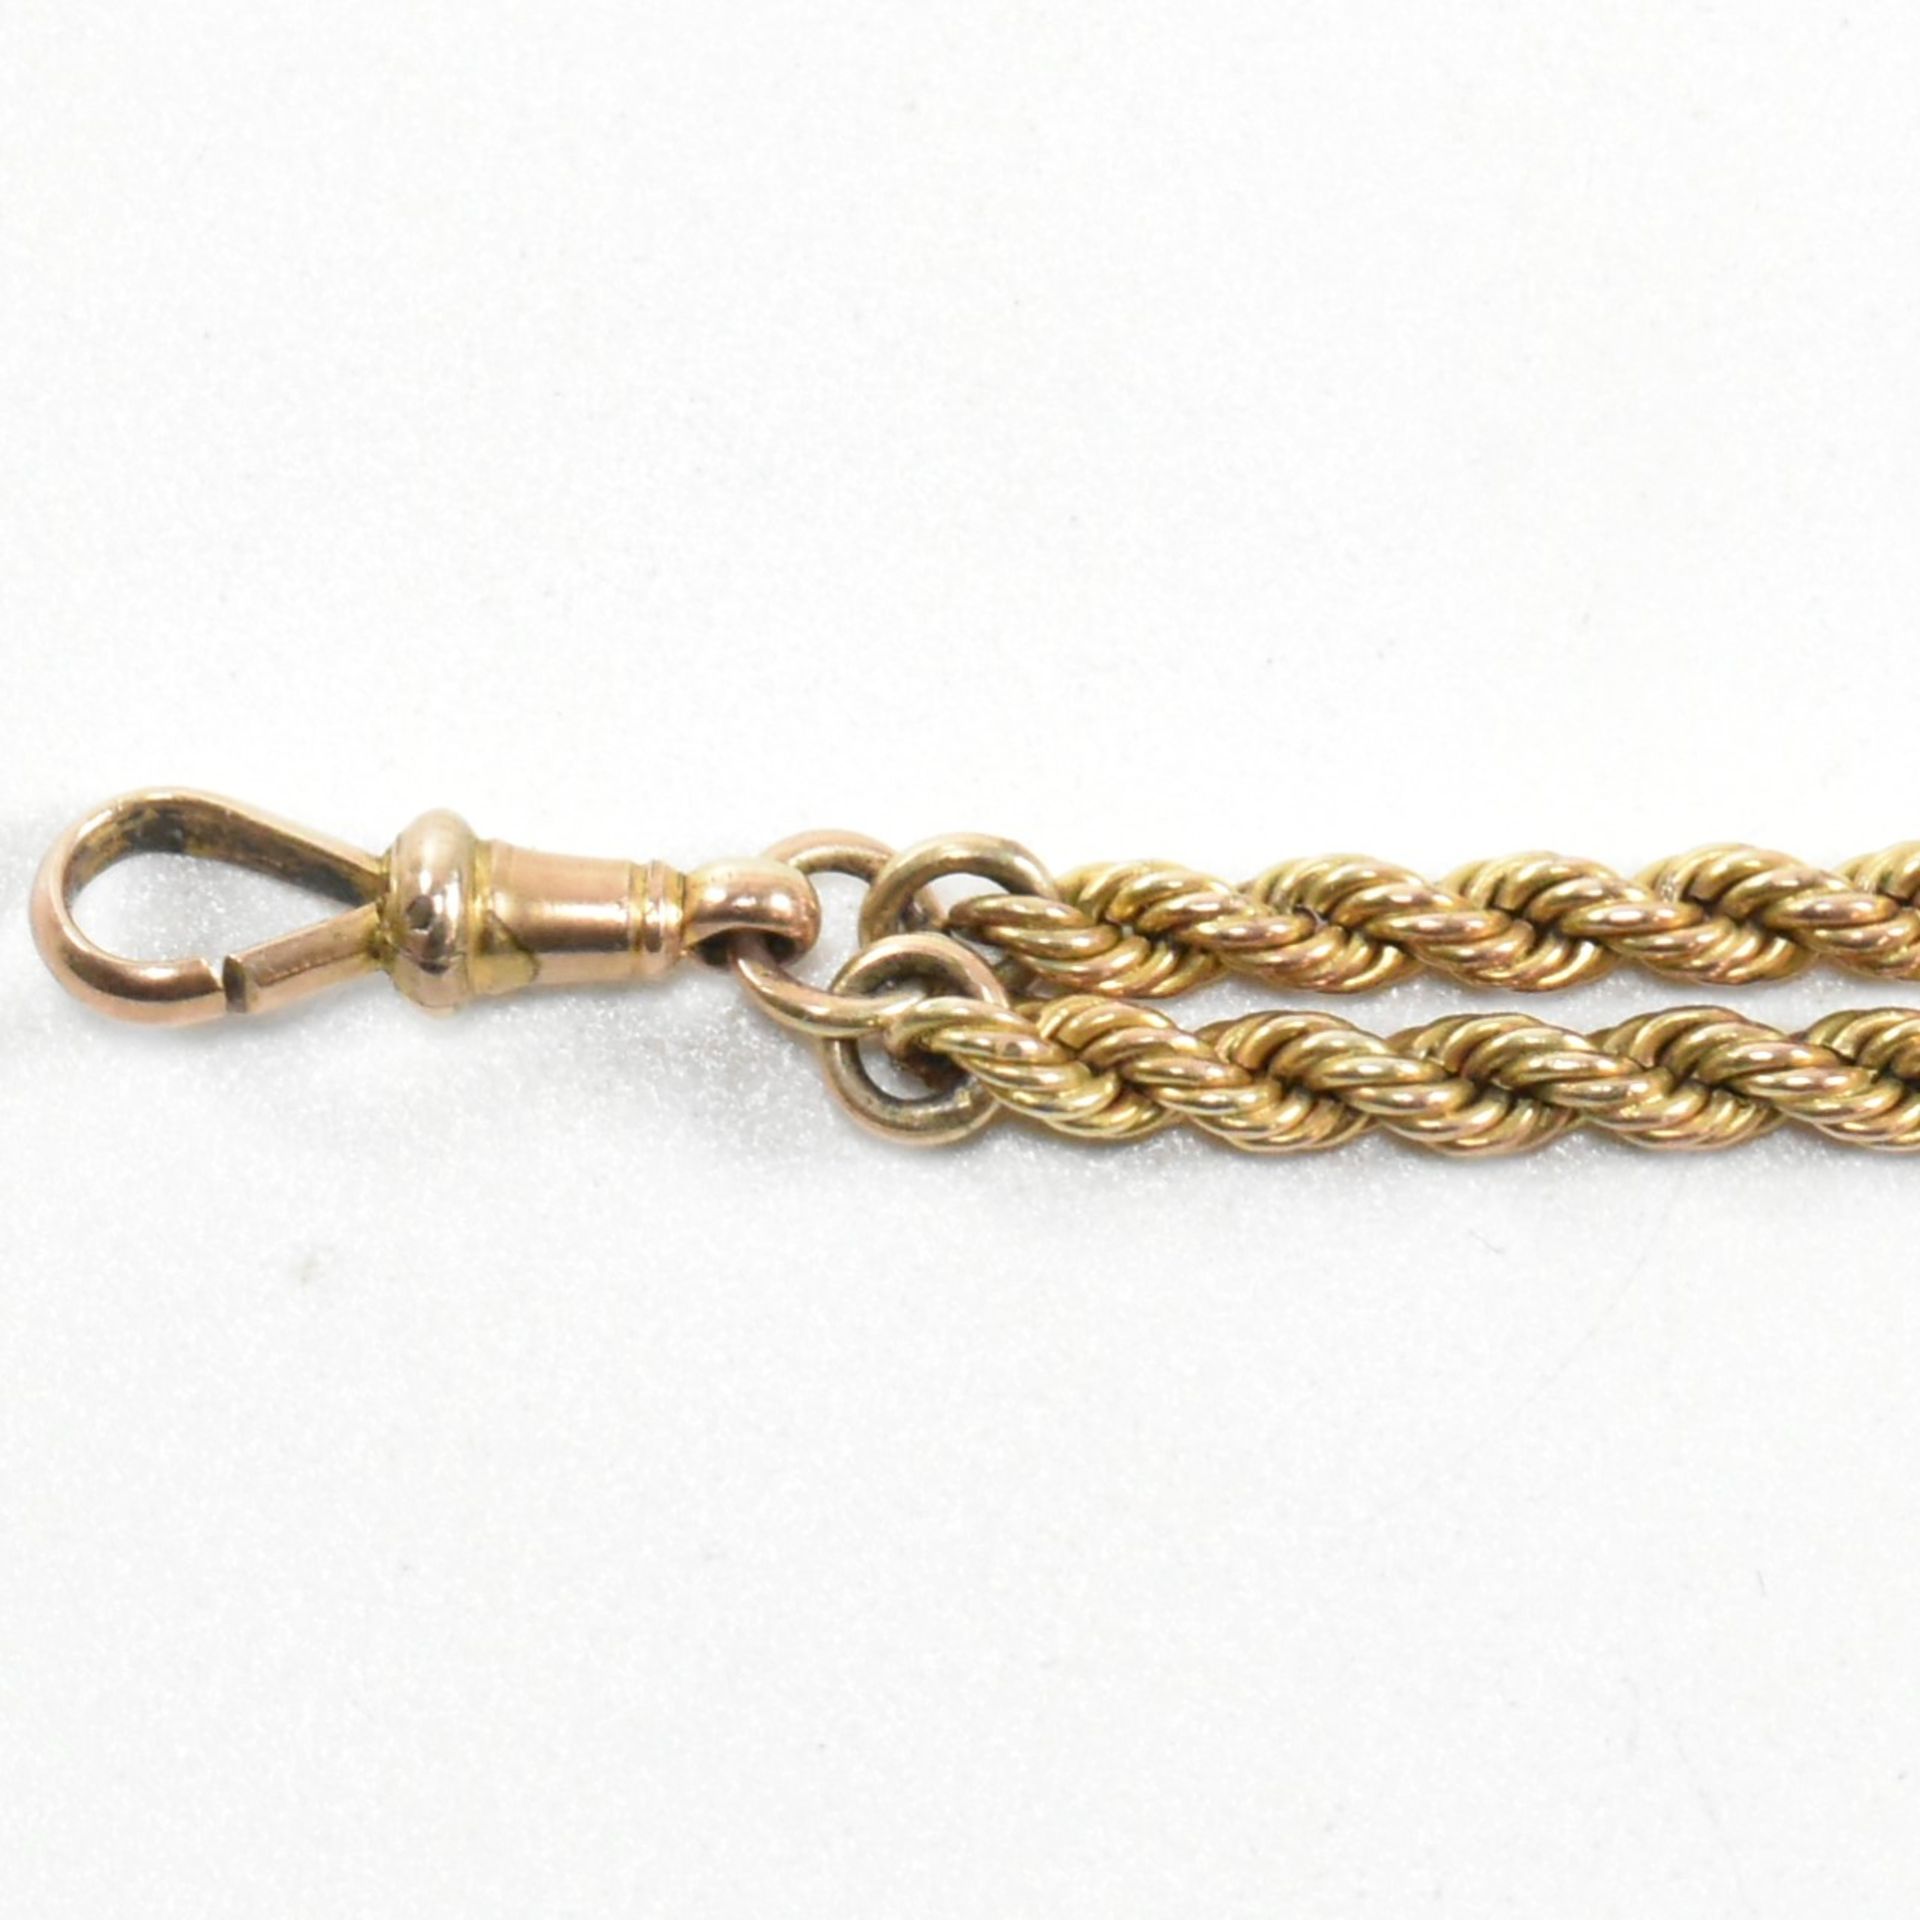 VICTORIAN 9CT GOLD LEONTINE WATCH CHAIN - Image 5 of 7